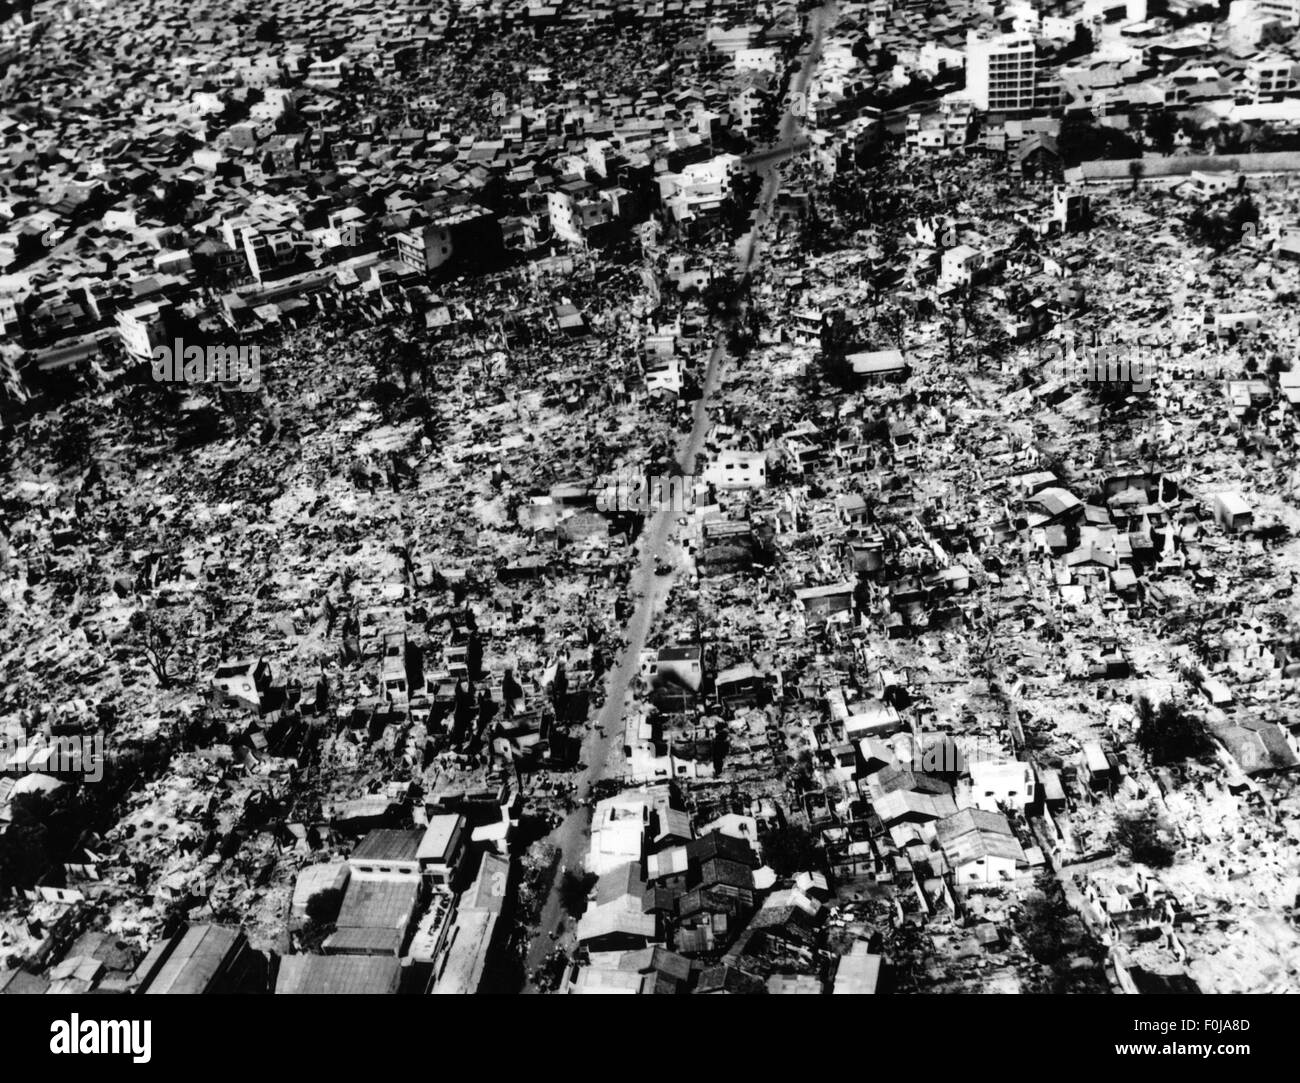 geography/travel, Asia, Vietnam, Viet Nam, War, South Vietnam, ruined, destroyed, district Cholon, Saigon, 1968, Additional-Rights-Clearences-Not Available Stock Photo